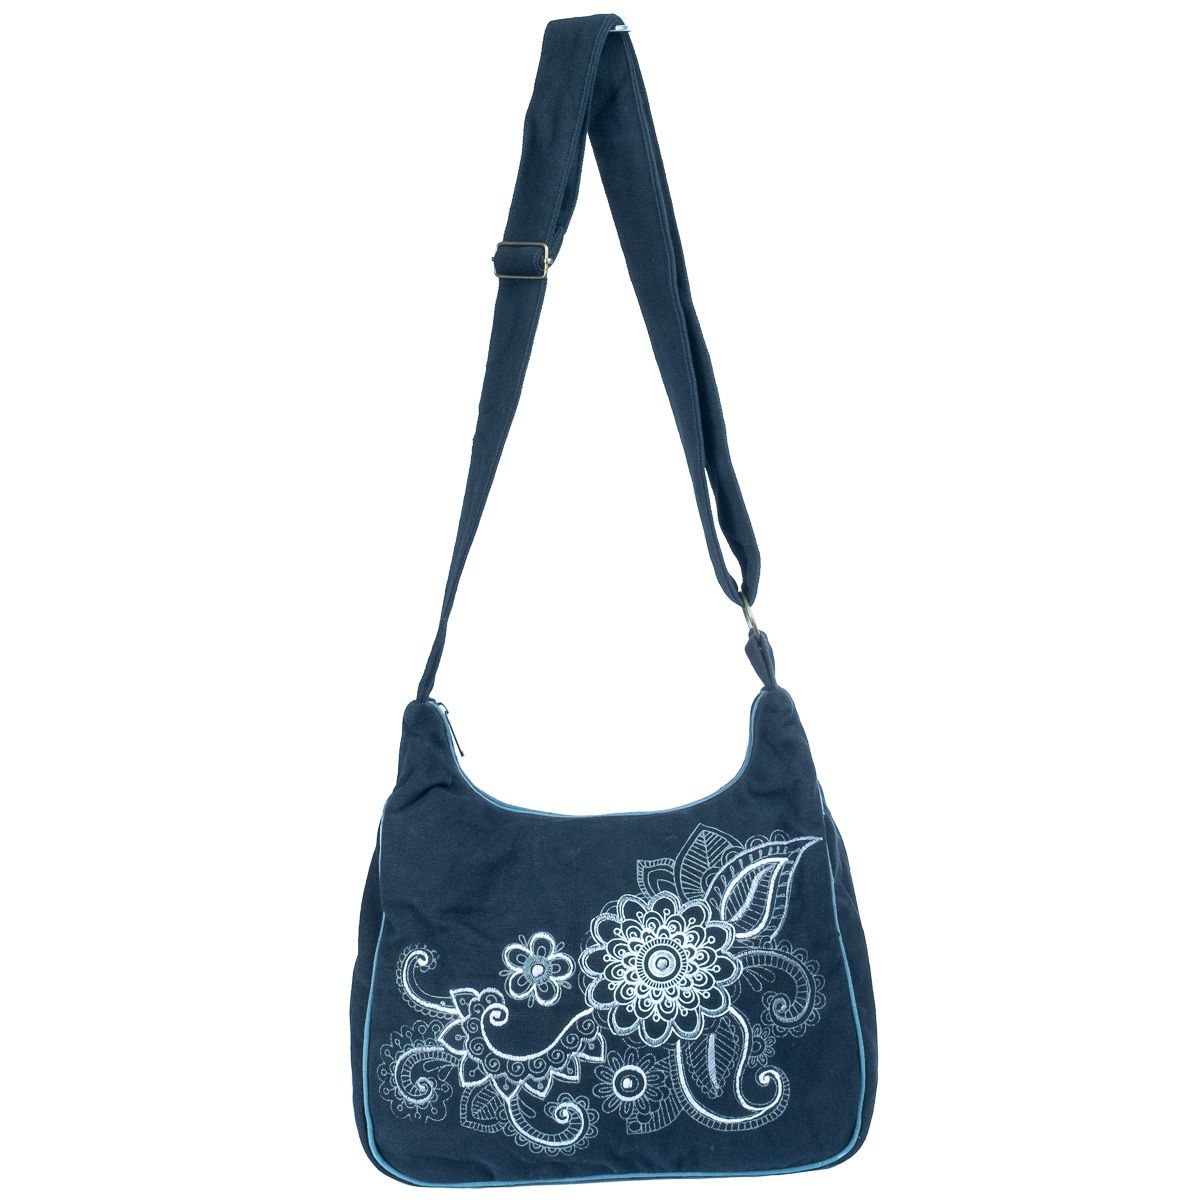 Ethno bag with embroidered flowers Albena Hitam Nepal